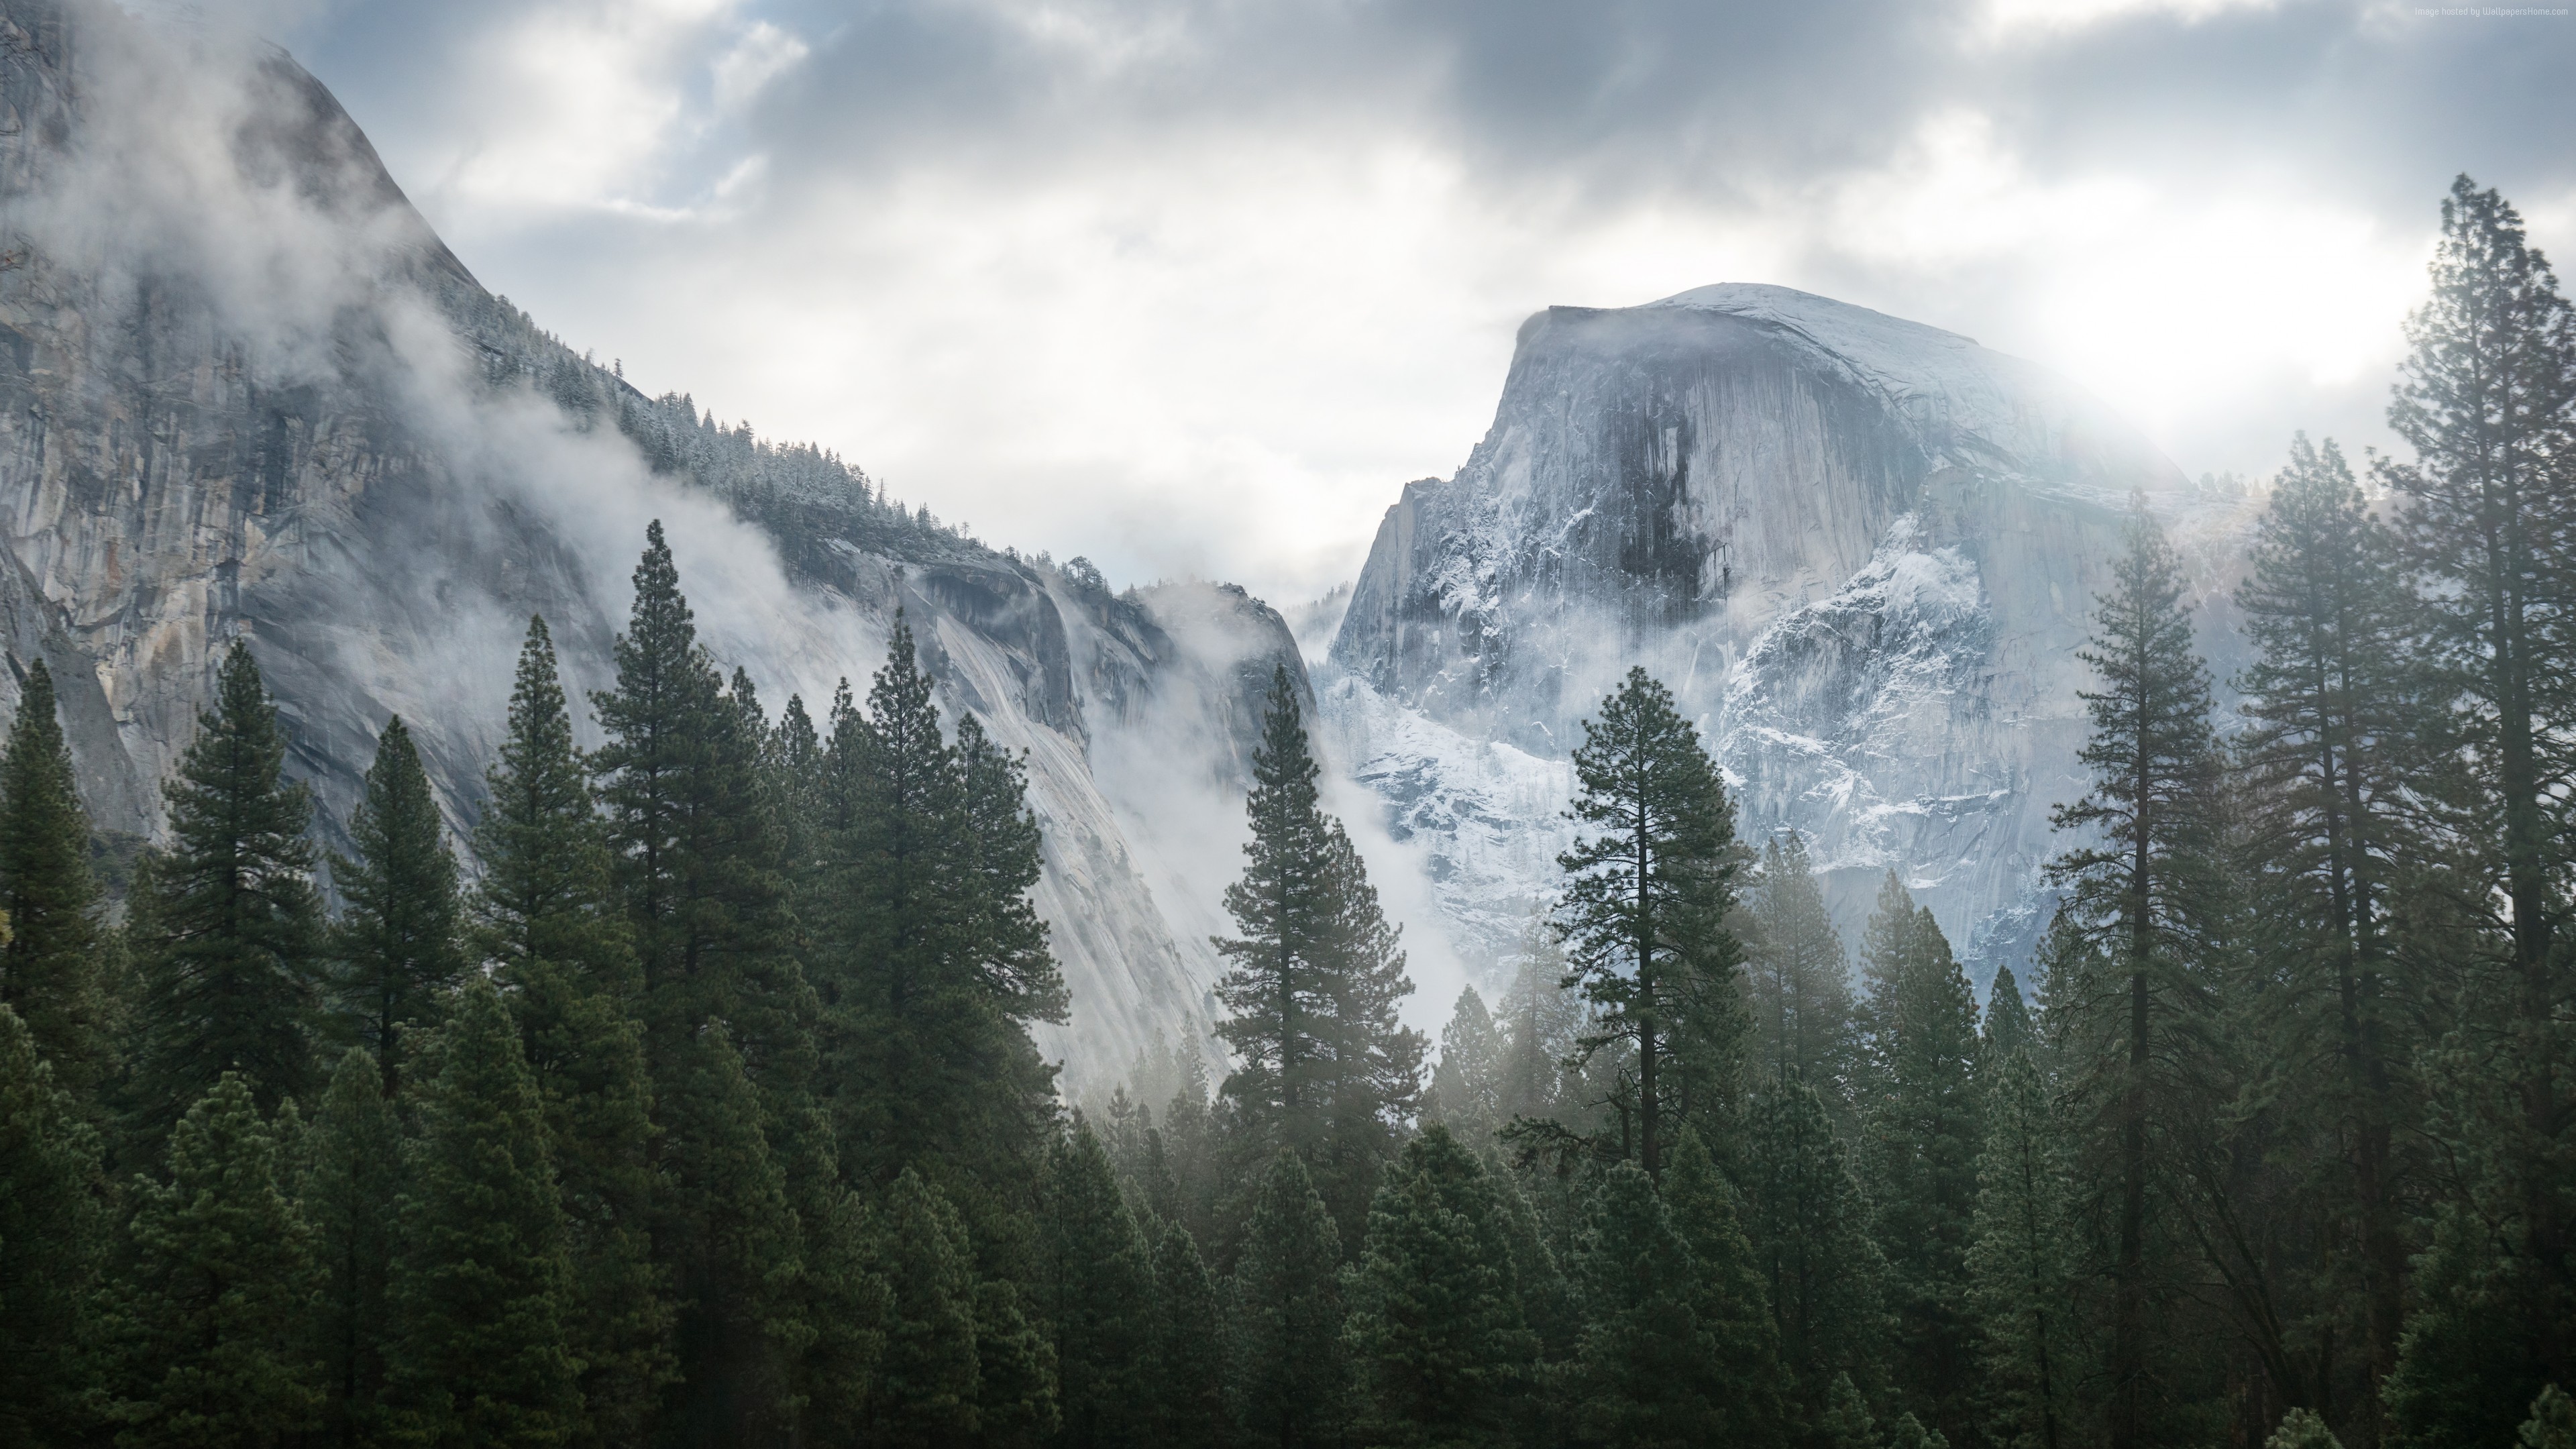 General 3840x2160 Yosemite National Park forest mountains clouds landscape nature